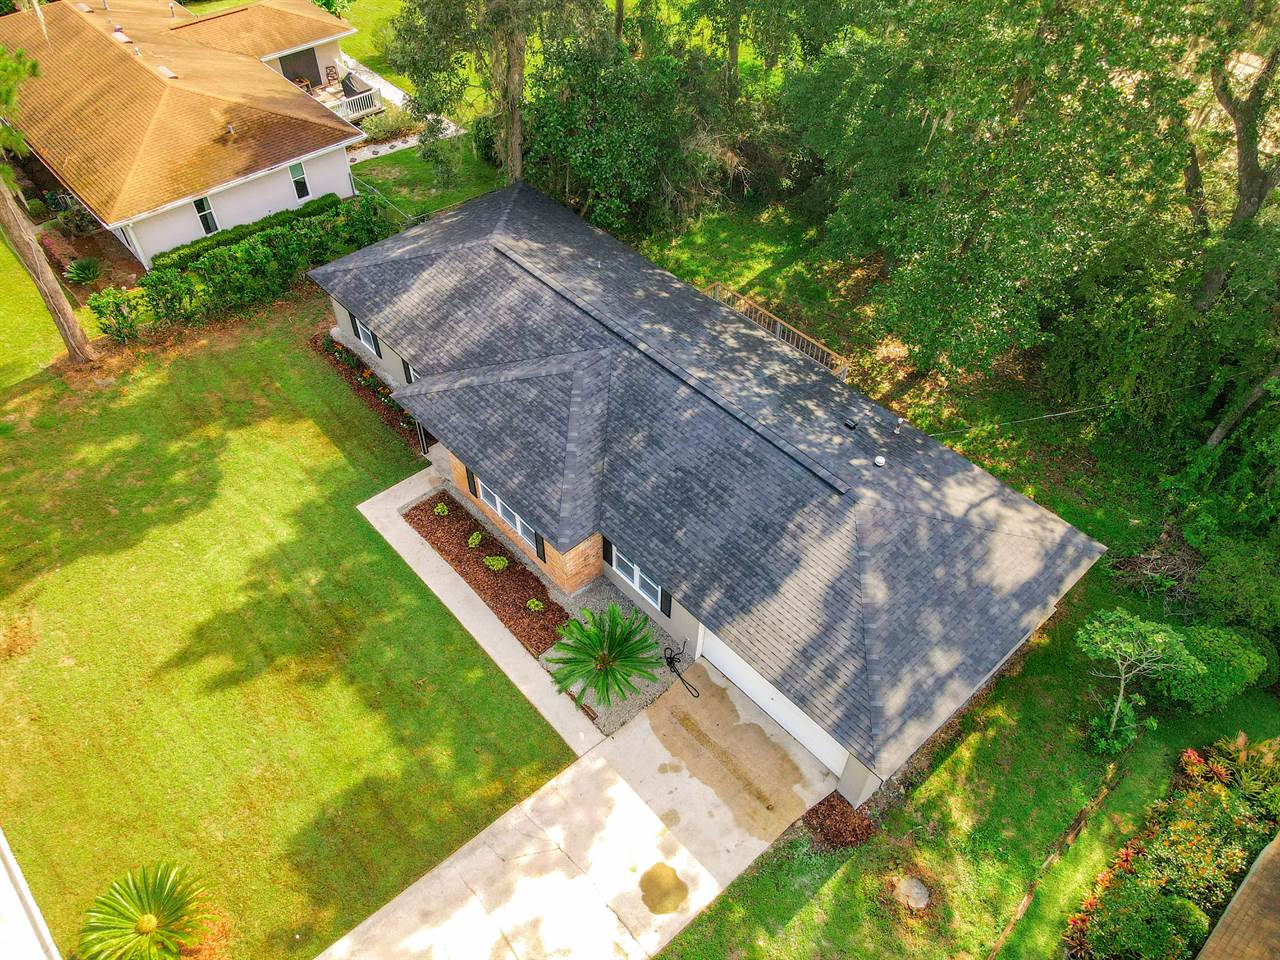 2509 NW 68th Ter, Gainesville, FL 32606